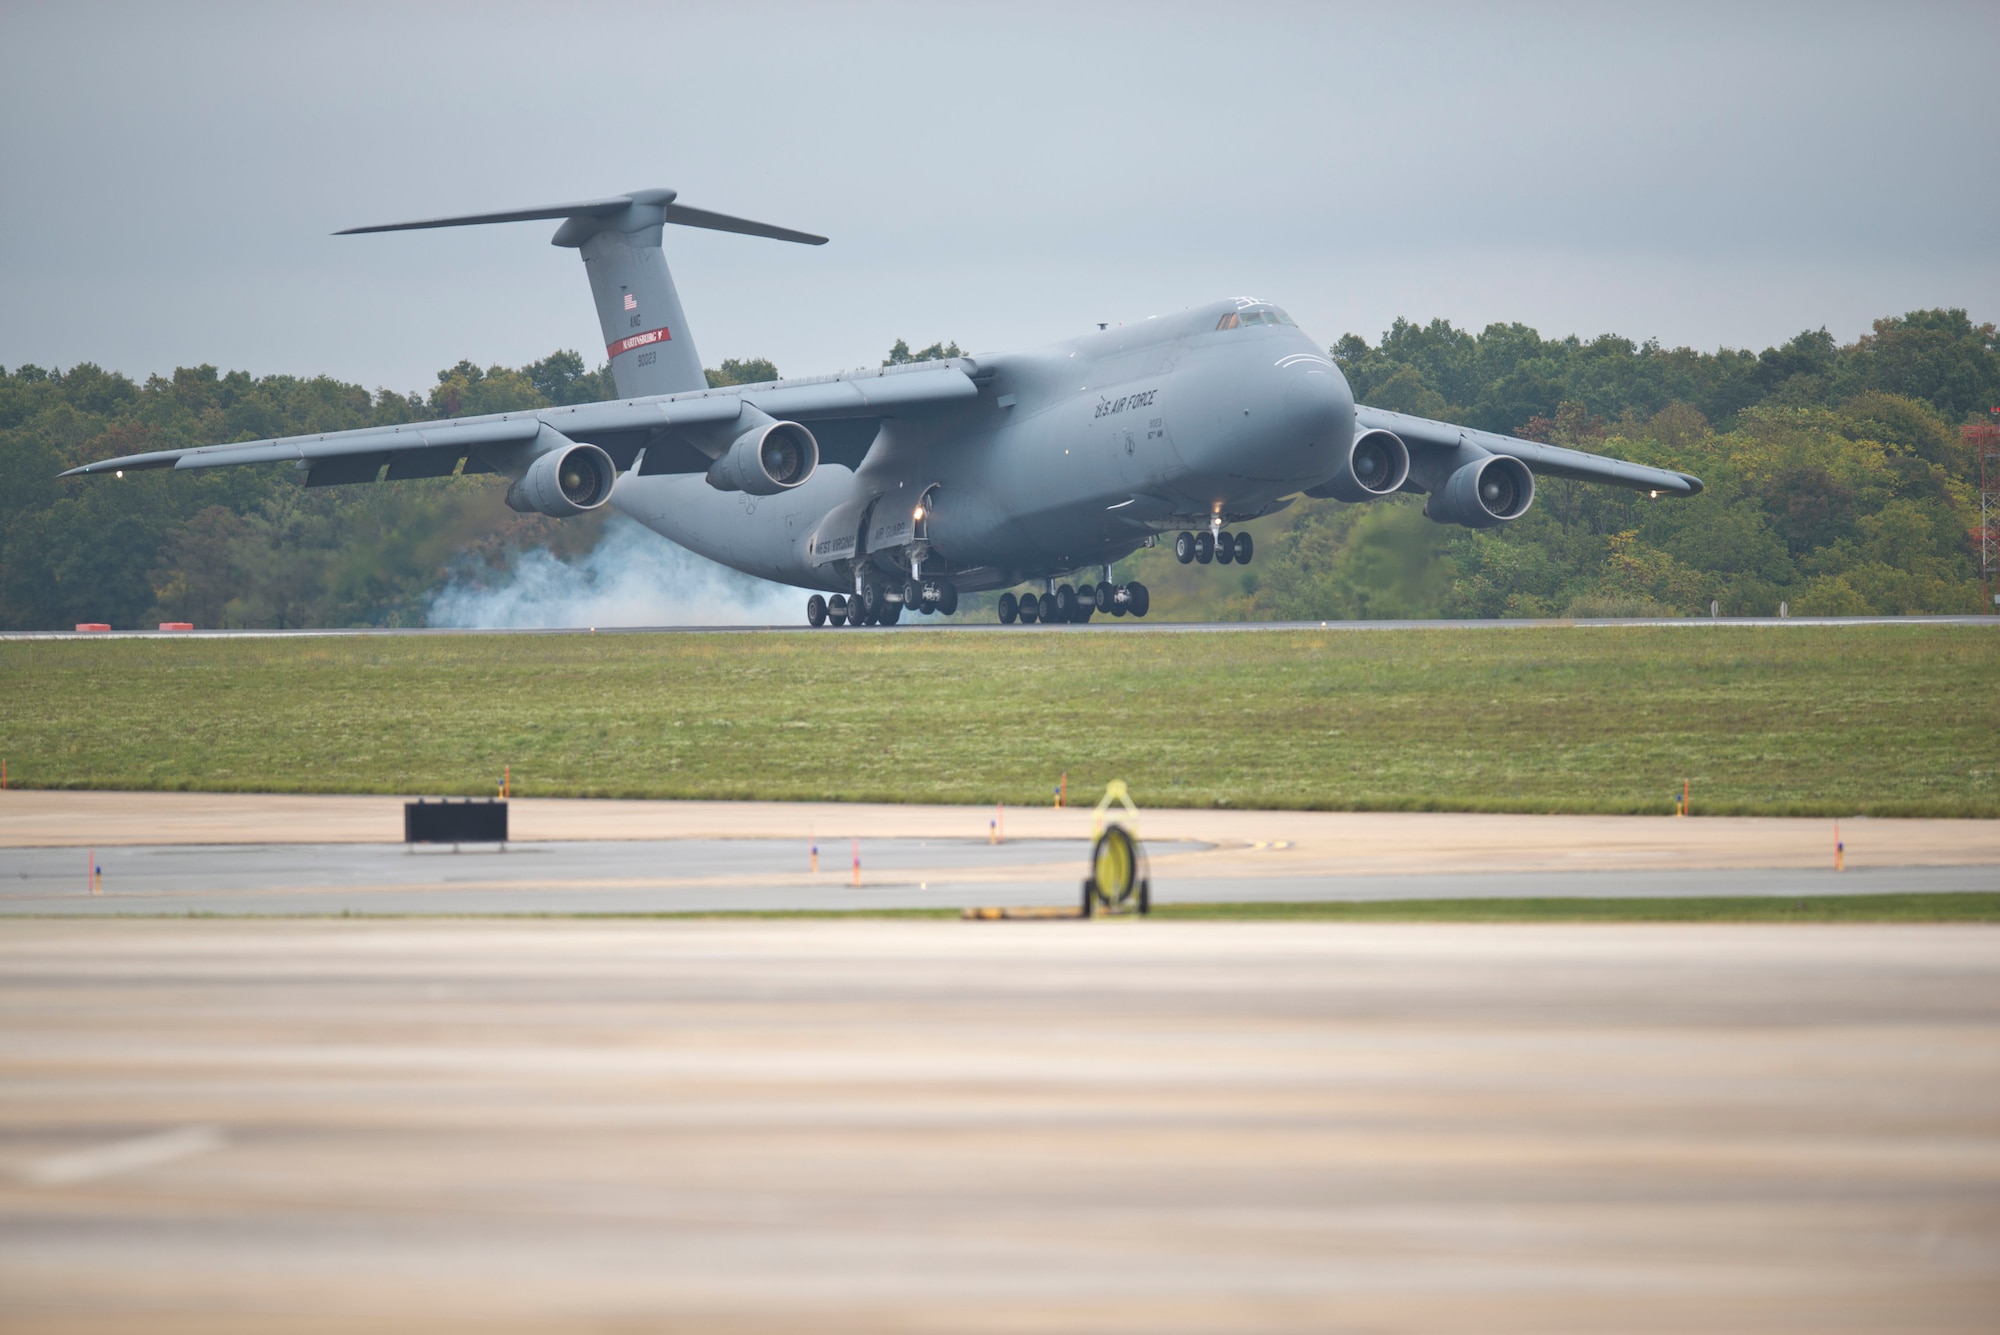 MARTINSBURG, W.Va.-- The first C-17 Globemaster III arrived at the 167th Airlift Wing in Martinsburg, W. Va. on September 25th, 2014.  The wing has flown the C-5 Galaxy since 2007 and will begin C-17 flying operations in January 2015. The last C-5 unit in the Air National Guard, the 167th began the conversion process in July and will maintain a fleet of eight C-17s. (U.S. Air National Guard photo by Tech. Sgt. Michael Dickson/Released)